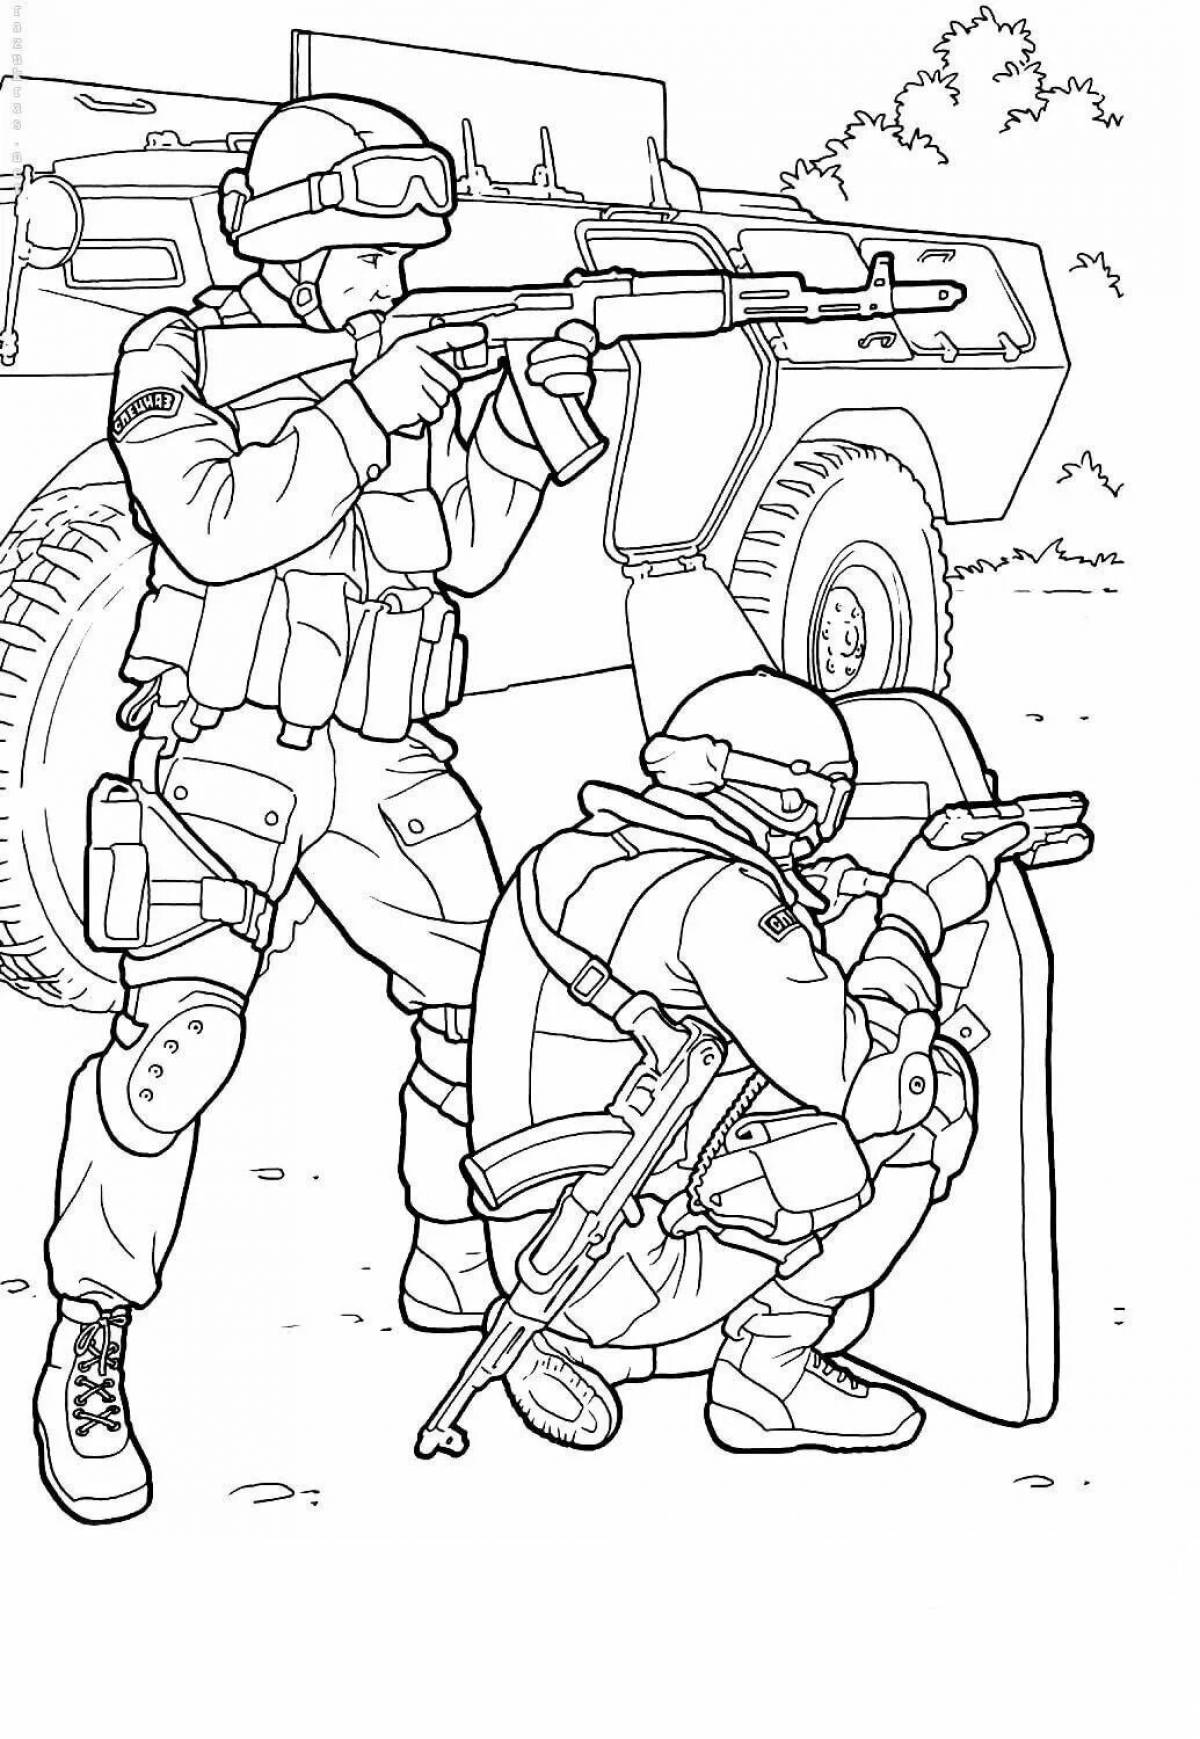 Wonderful Russian soldier coloring pages for kids